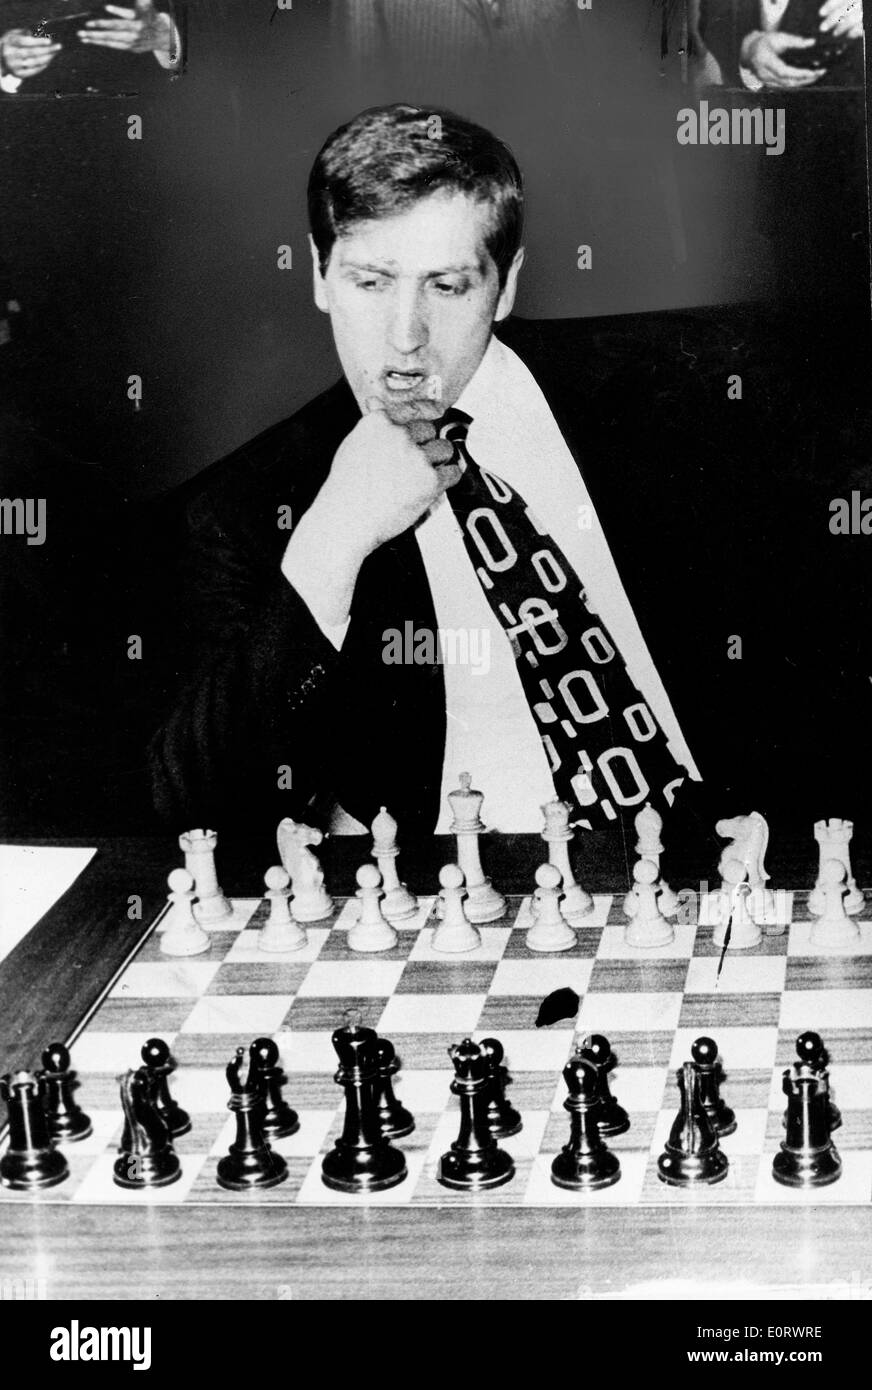 ROBERT BOBBY FISCHER ON COVER 1970 #7 EXYUGO CHESS MAGAZINE REVIEW